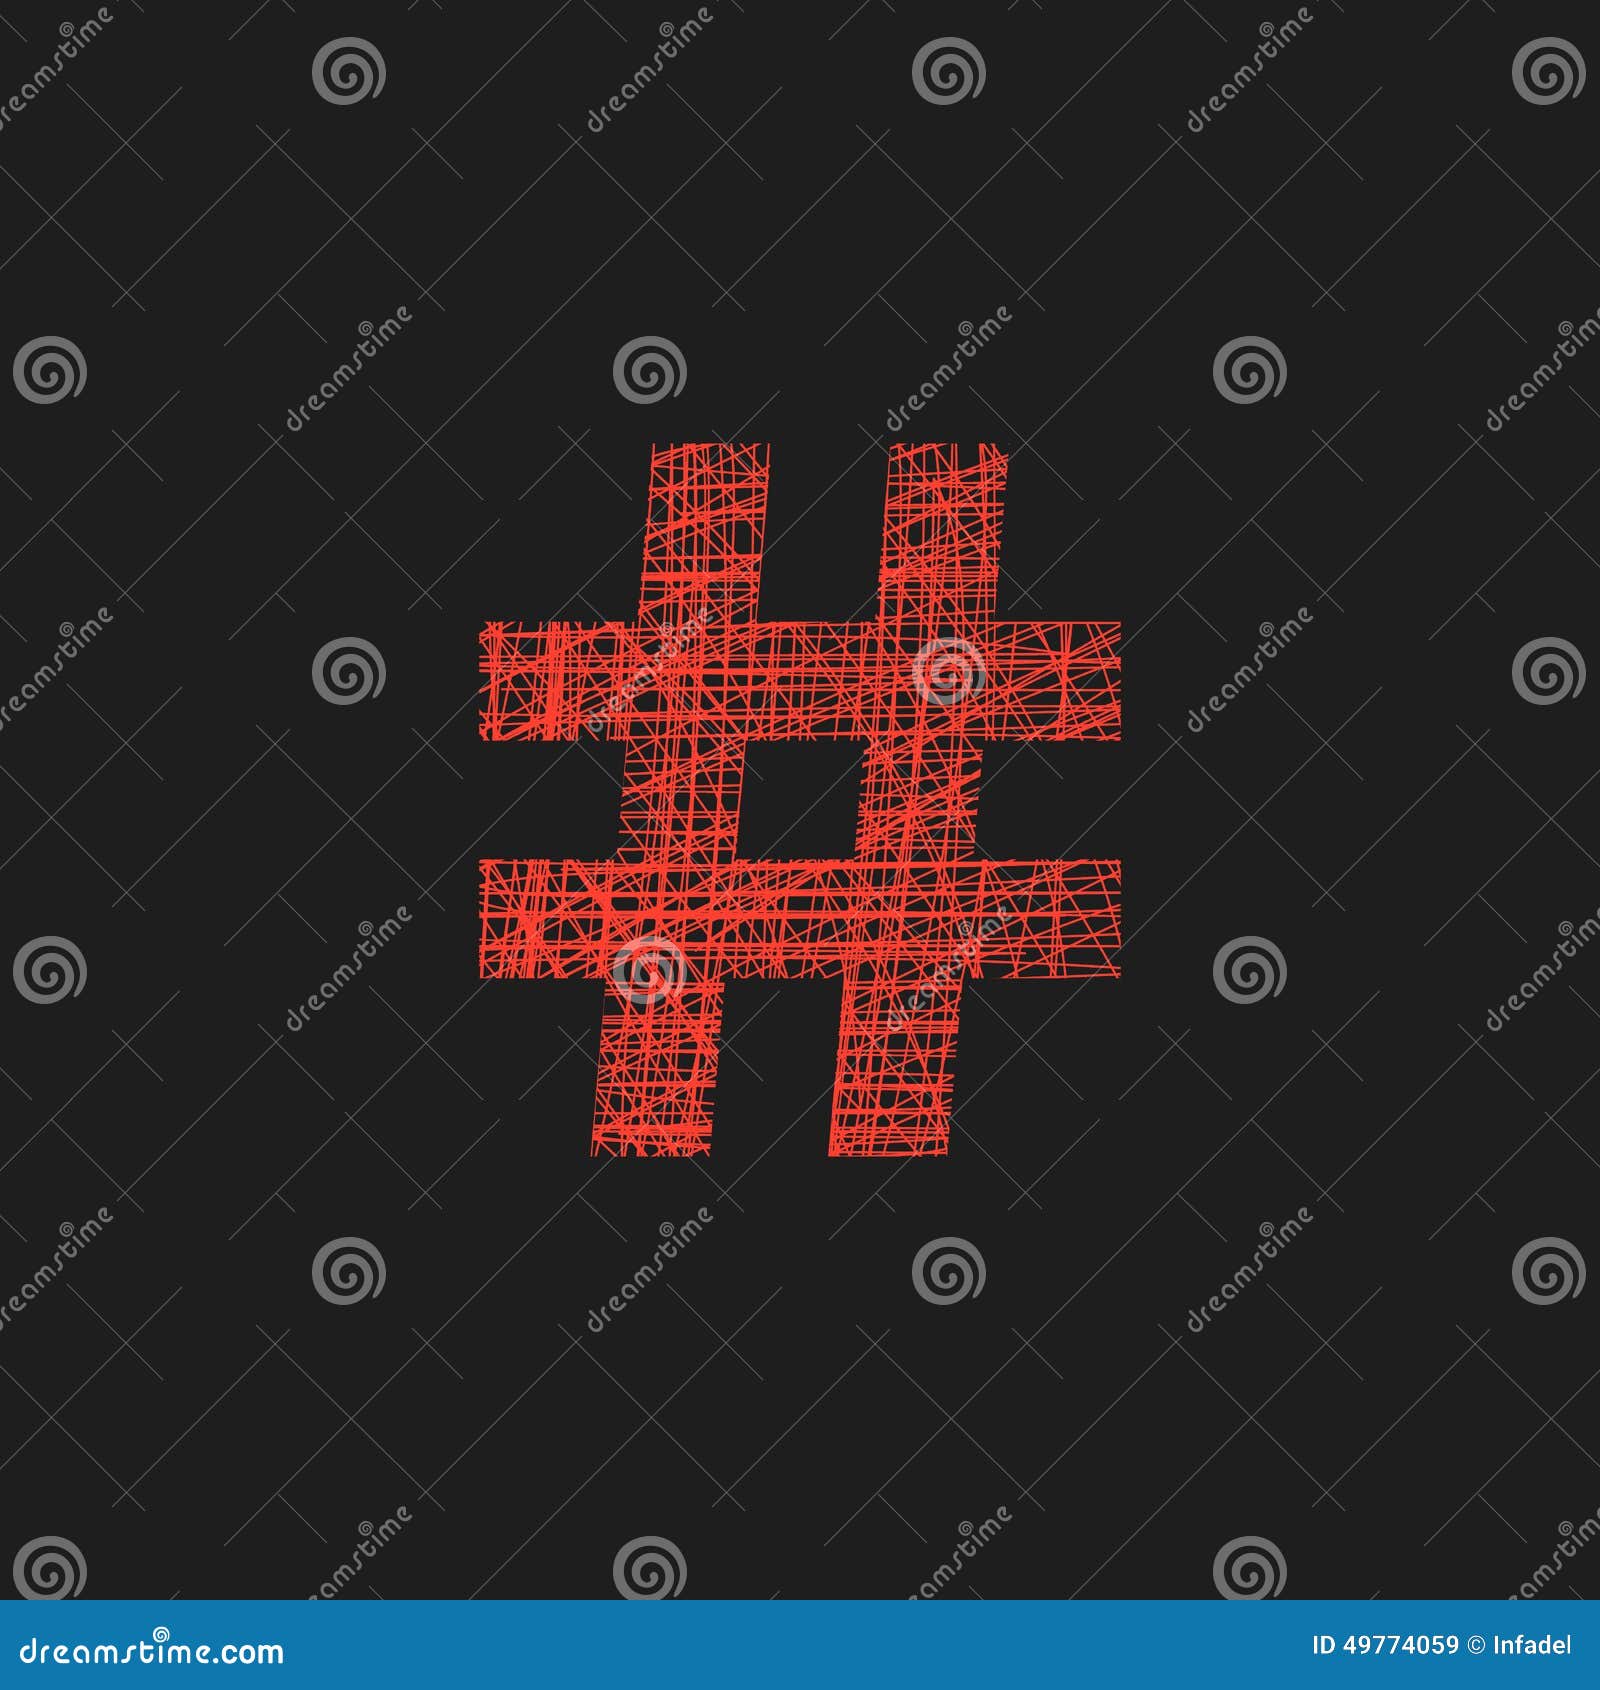 Hashtag hand drawn outline doodle icon Royalty Free Vector